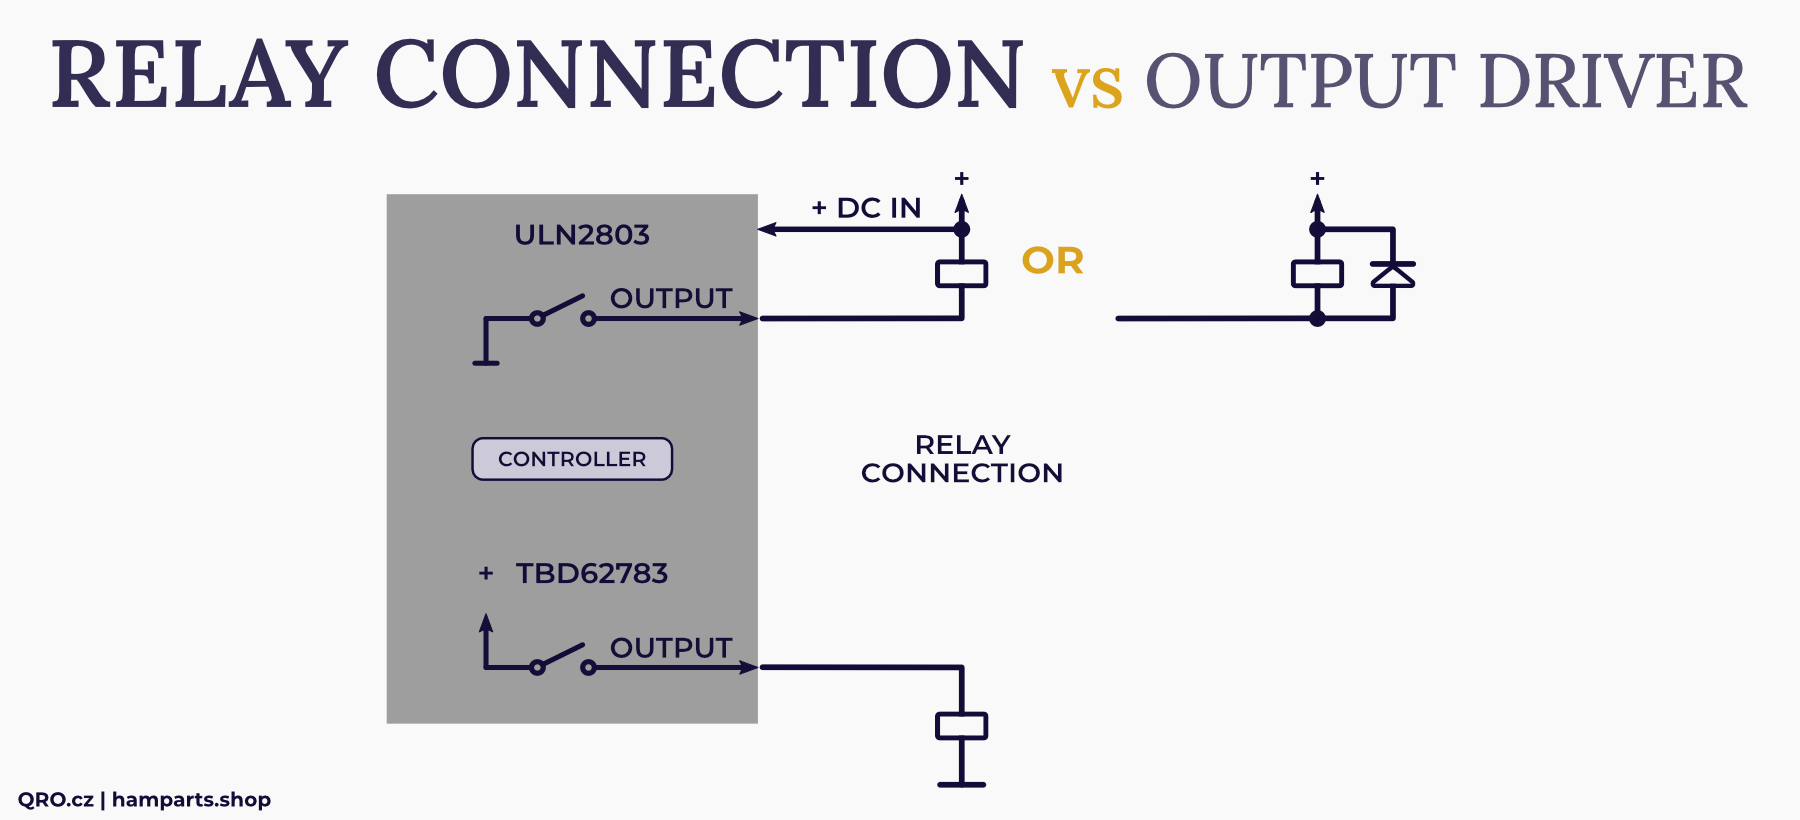 relay connection ult tbd driver difference positive and negative outputs qro.cz hamparts.shop